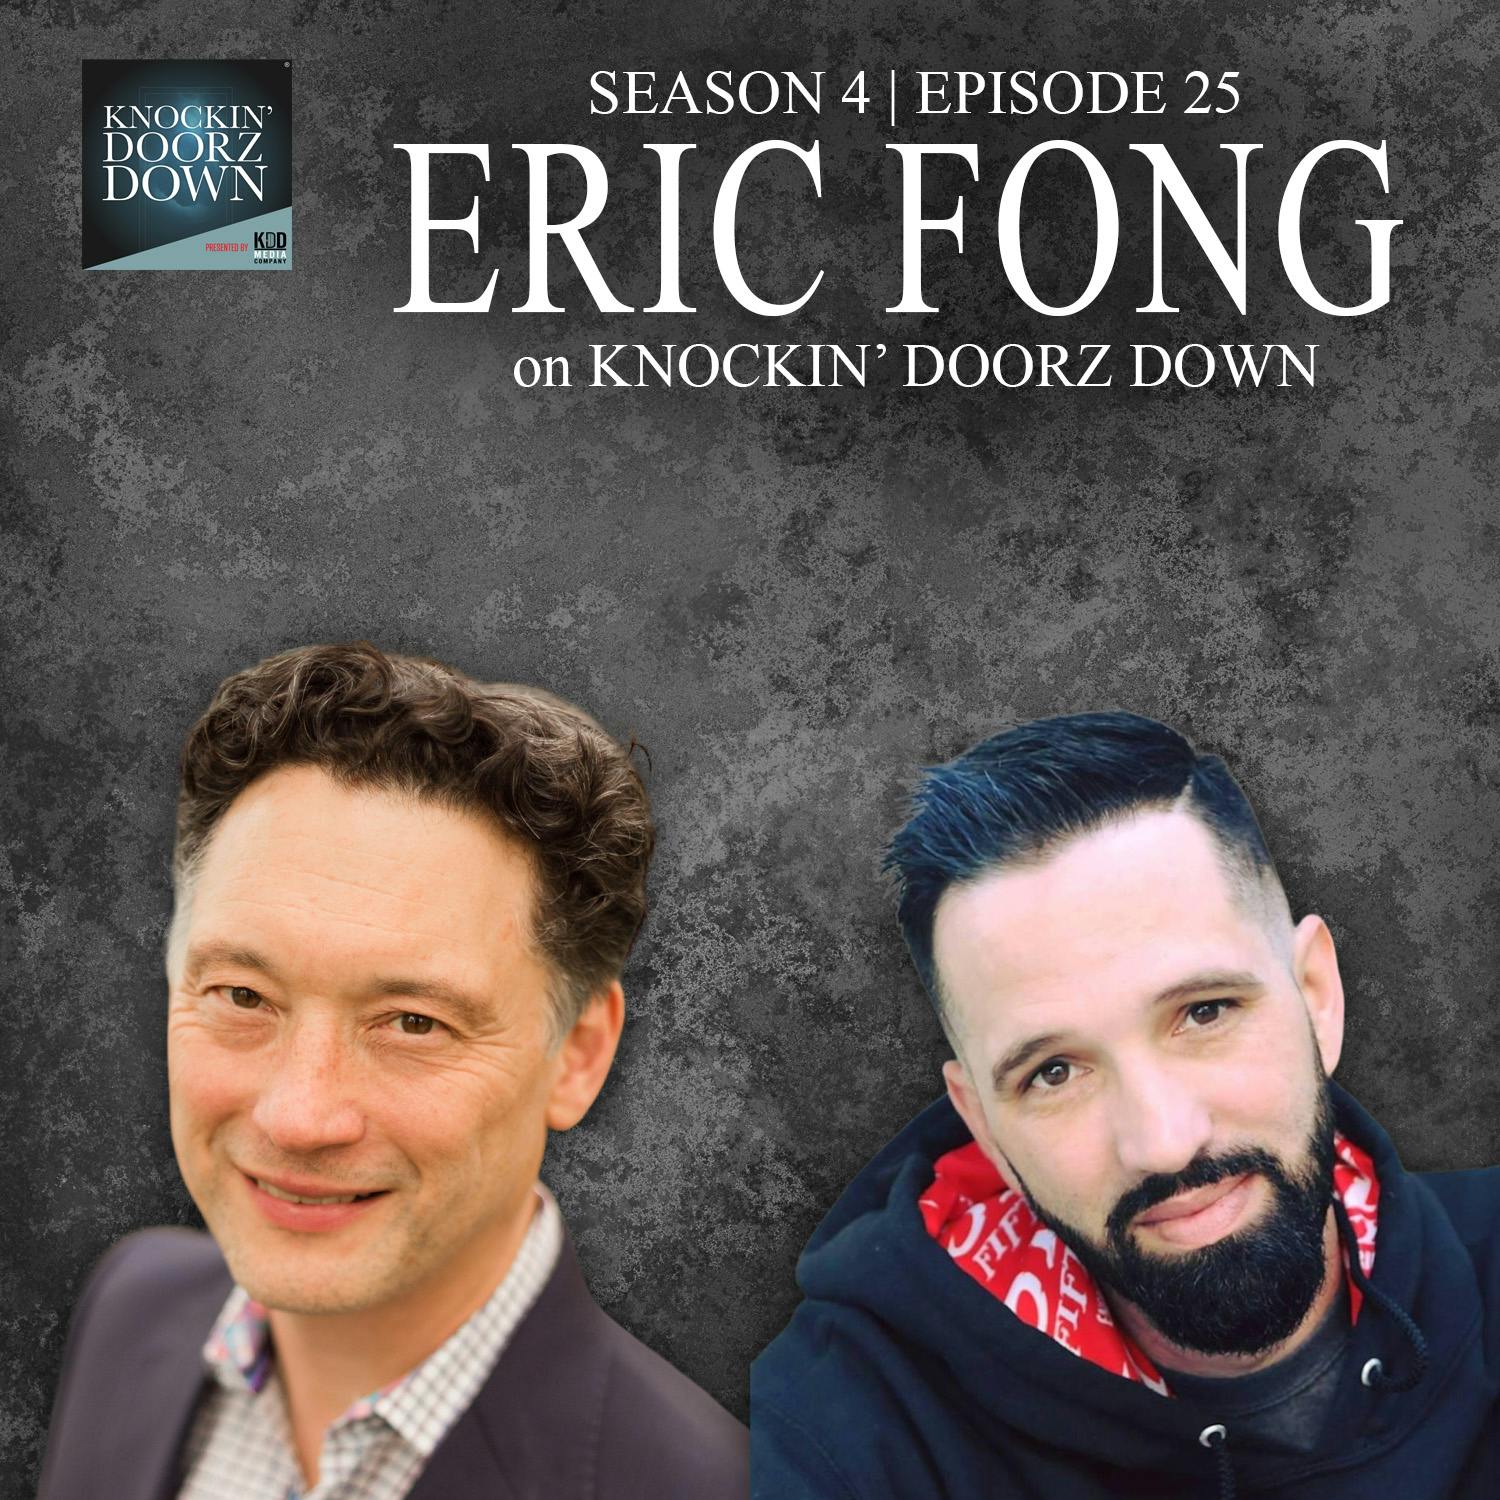 Eric Fong | High Level Attorney's Sobriety Journey, Traumatic Childhood & Defending George Clinton